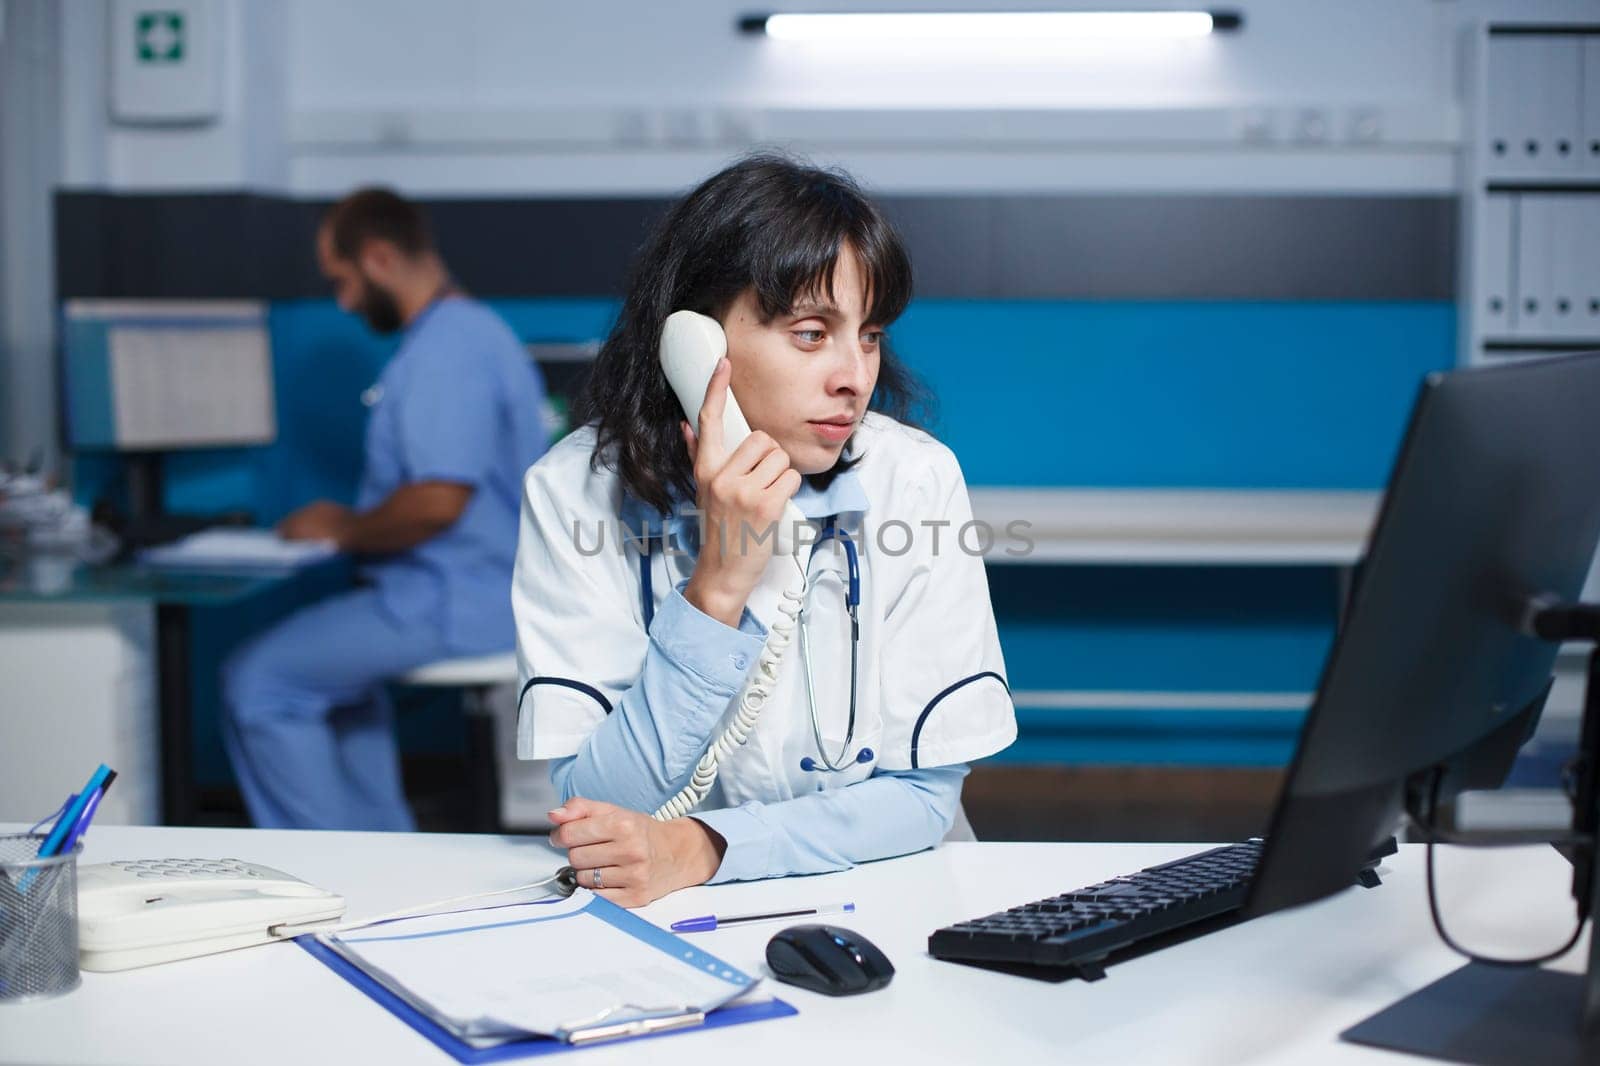 Caucasian doctor in modern office sitting at desk, speaking on landline. With a desktop PC on the table, a female physician is making a phone call. Technology and communication in healthcare.